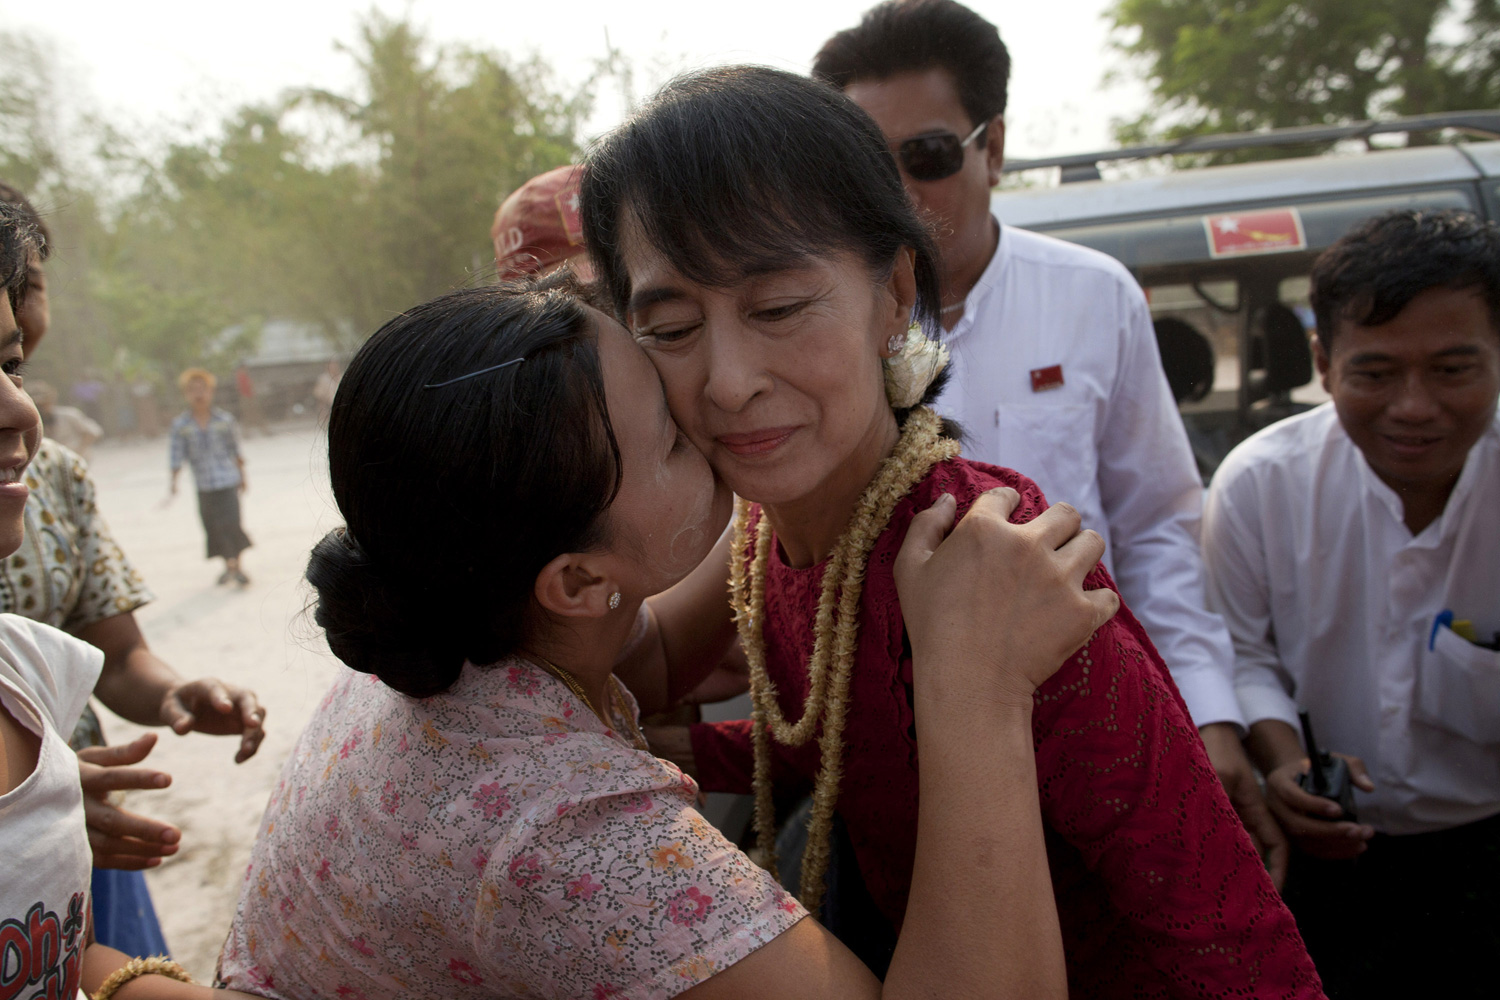 April 1, 2012.  A supporter kisses Aung San Suu Kyi, leader of the National League for Democracy (NLD), as she visits polling stations in her constituency as Burmese people vote in the parliamentary elections in Kaw Hmu, Myanmar.